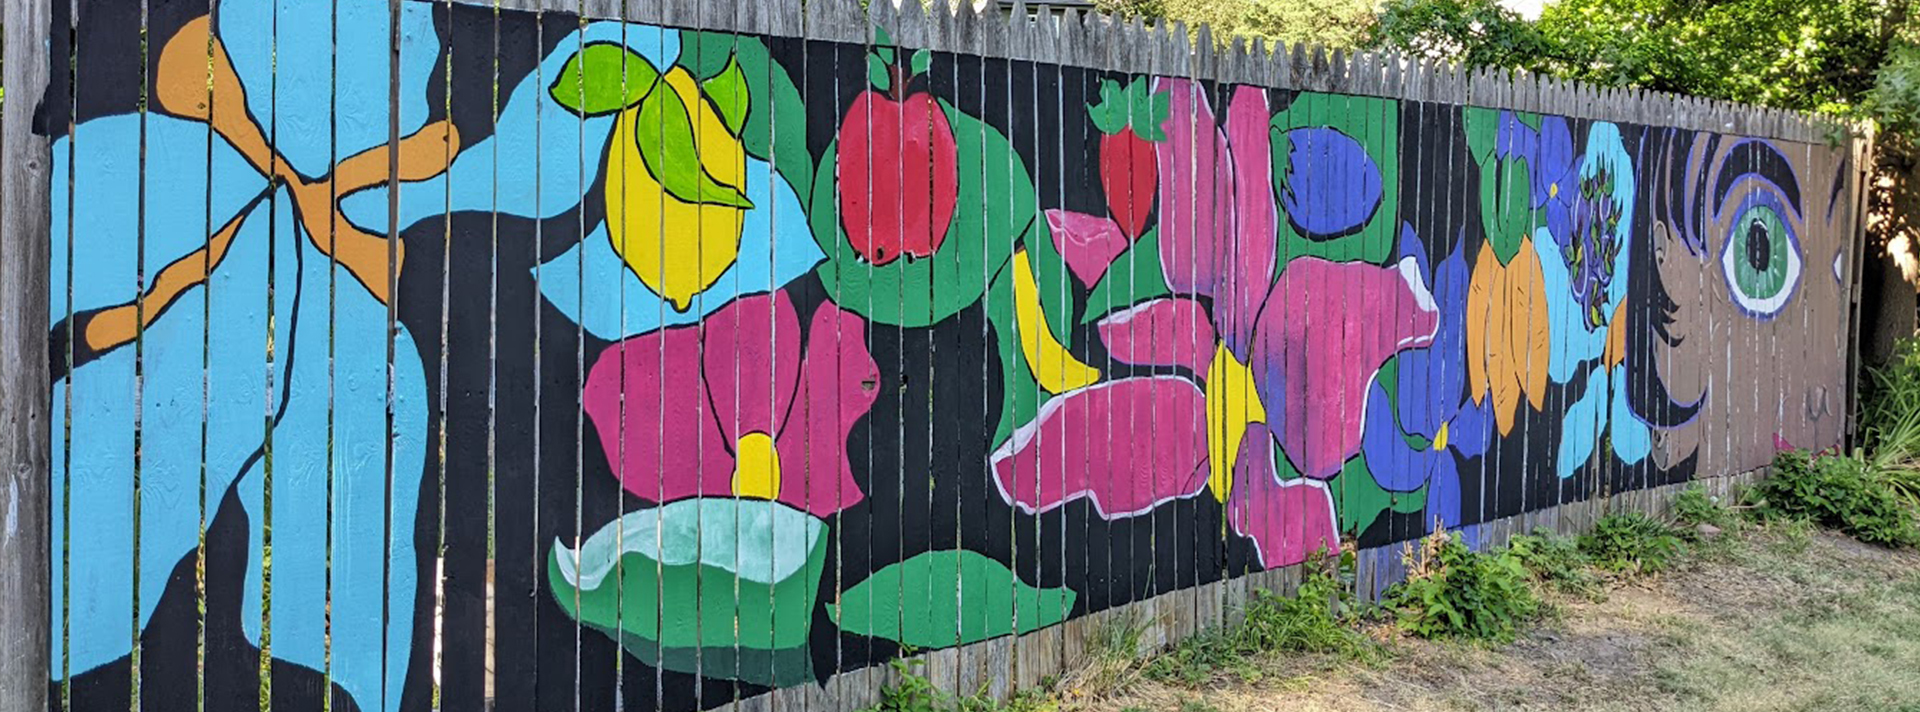 Header Carol Flora Project A mural of fruit and floral pattern and half a face on a wooden fence